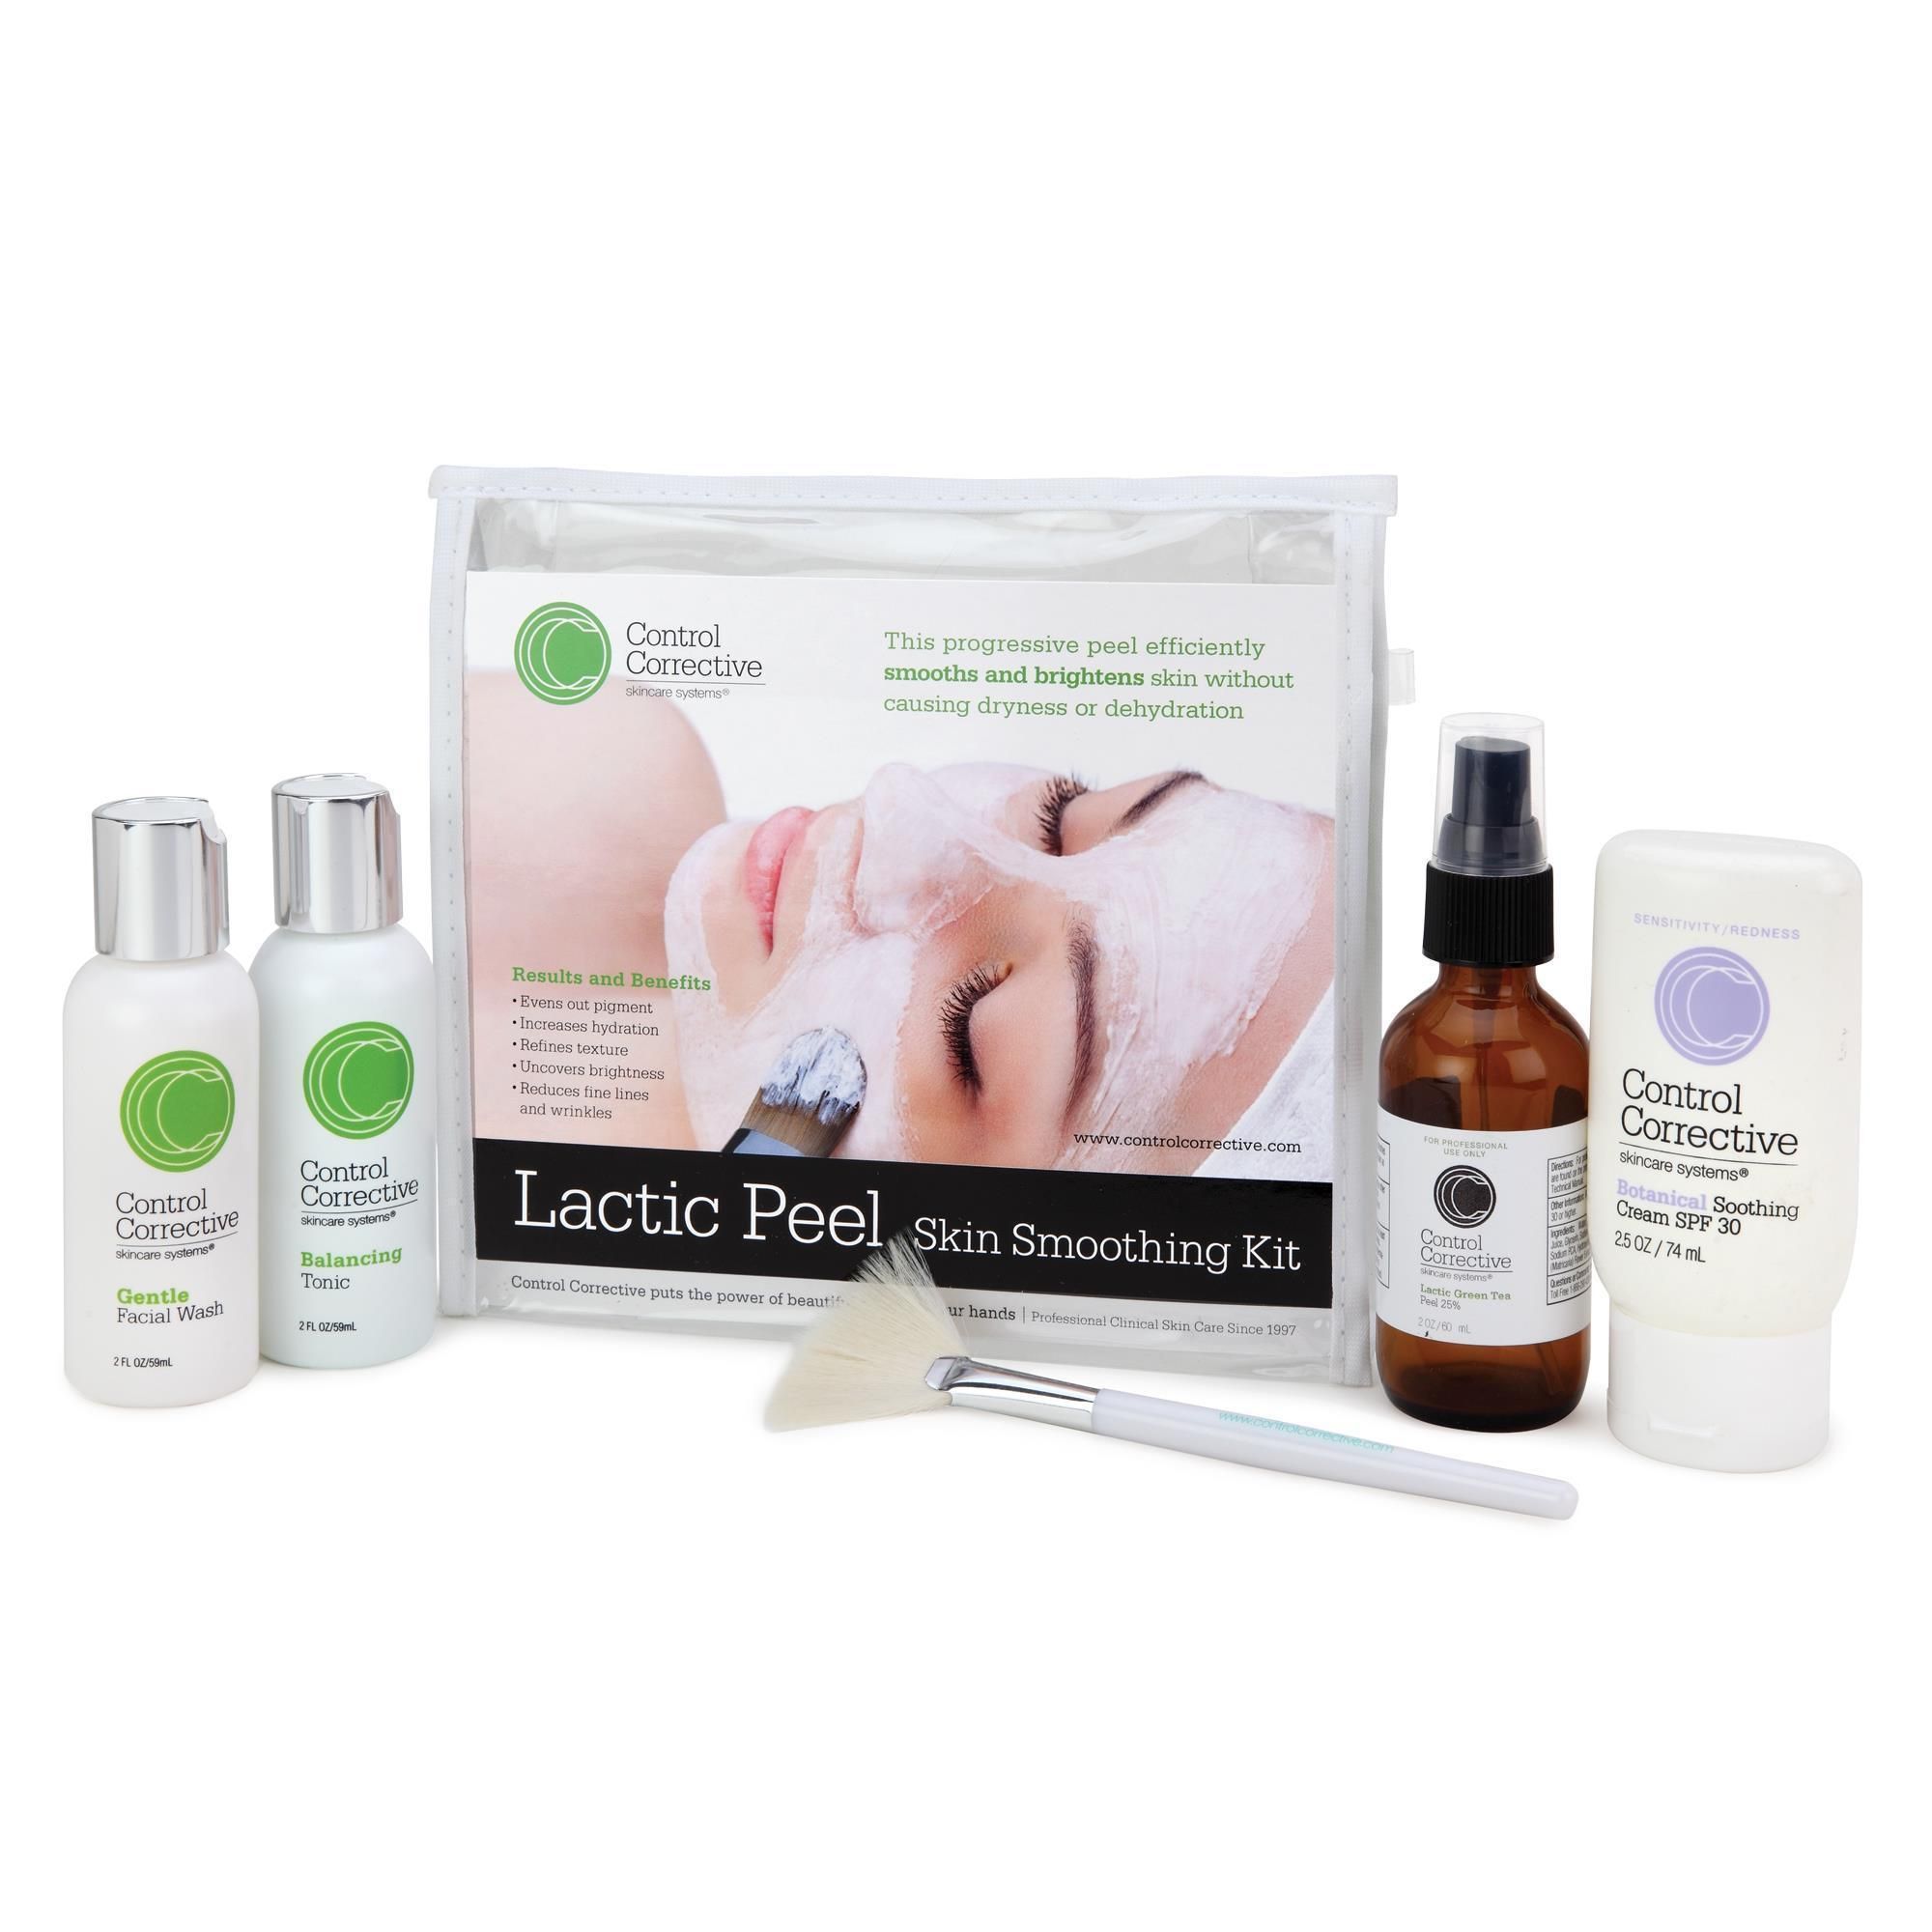 Control Corrective Lactic Peel Skin Smoothing Kit 3 Kits -   beauty Therapy kit